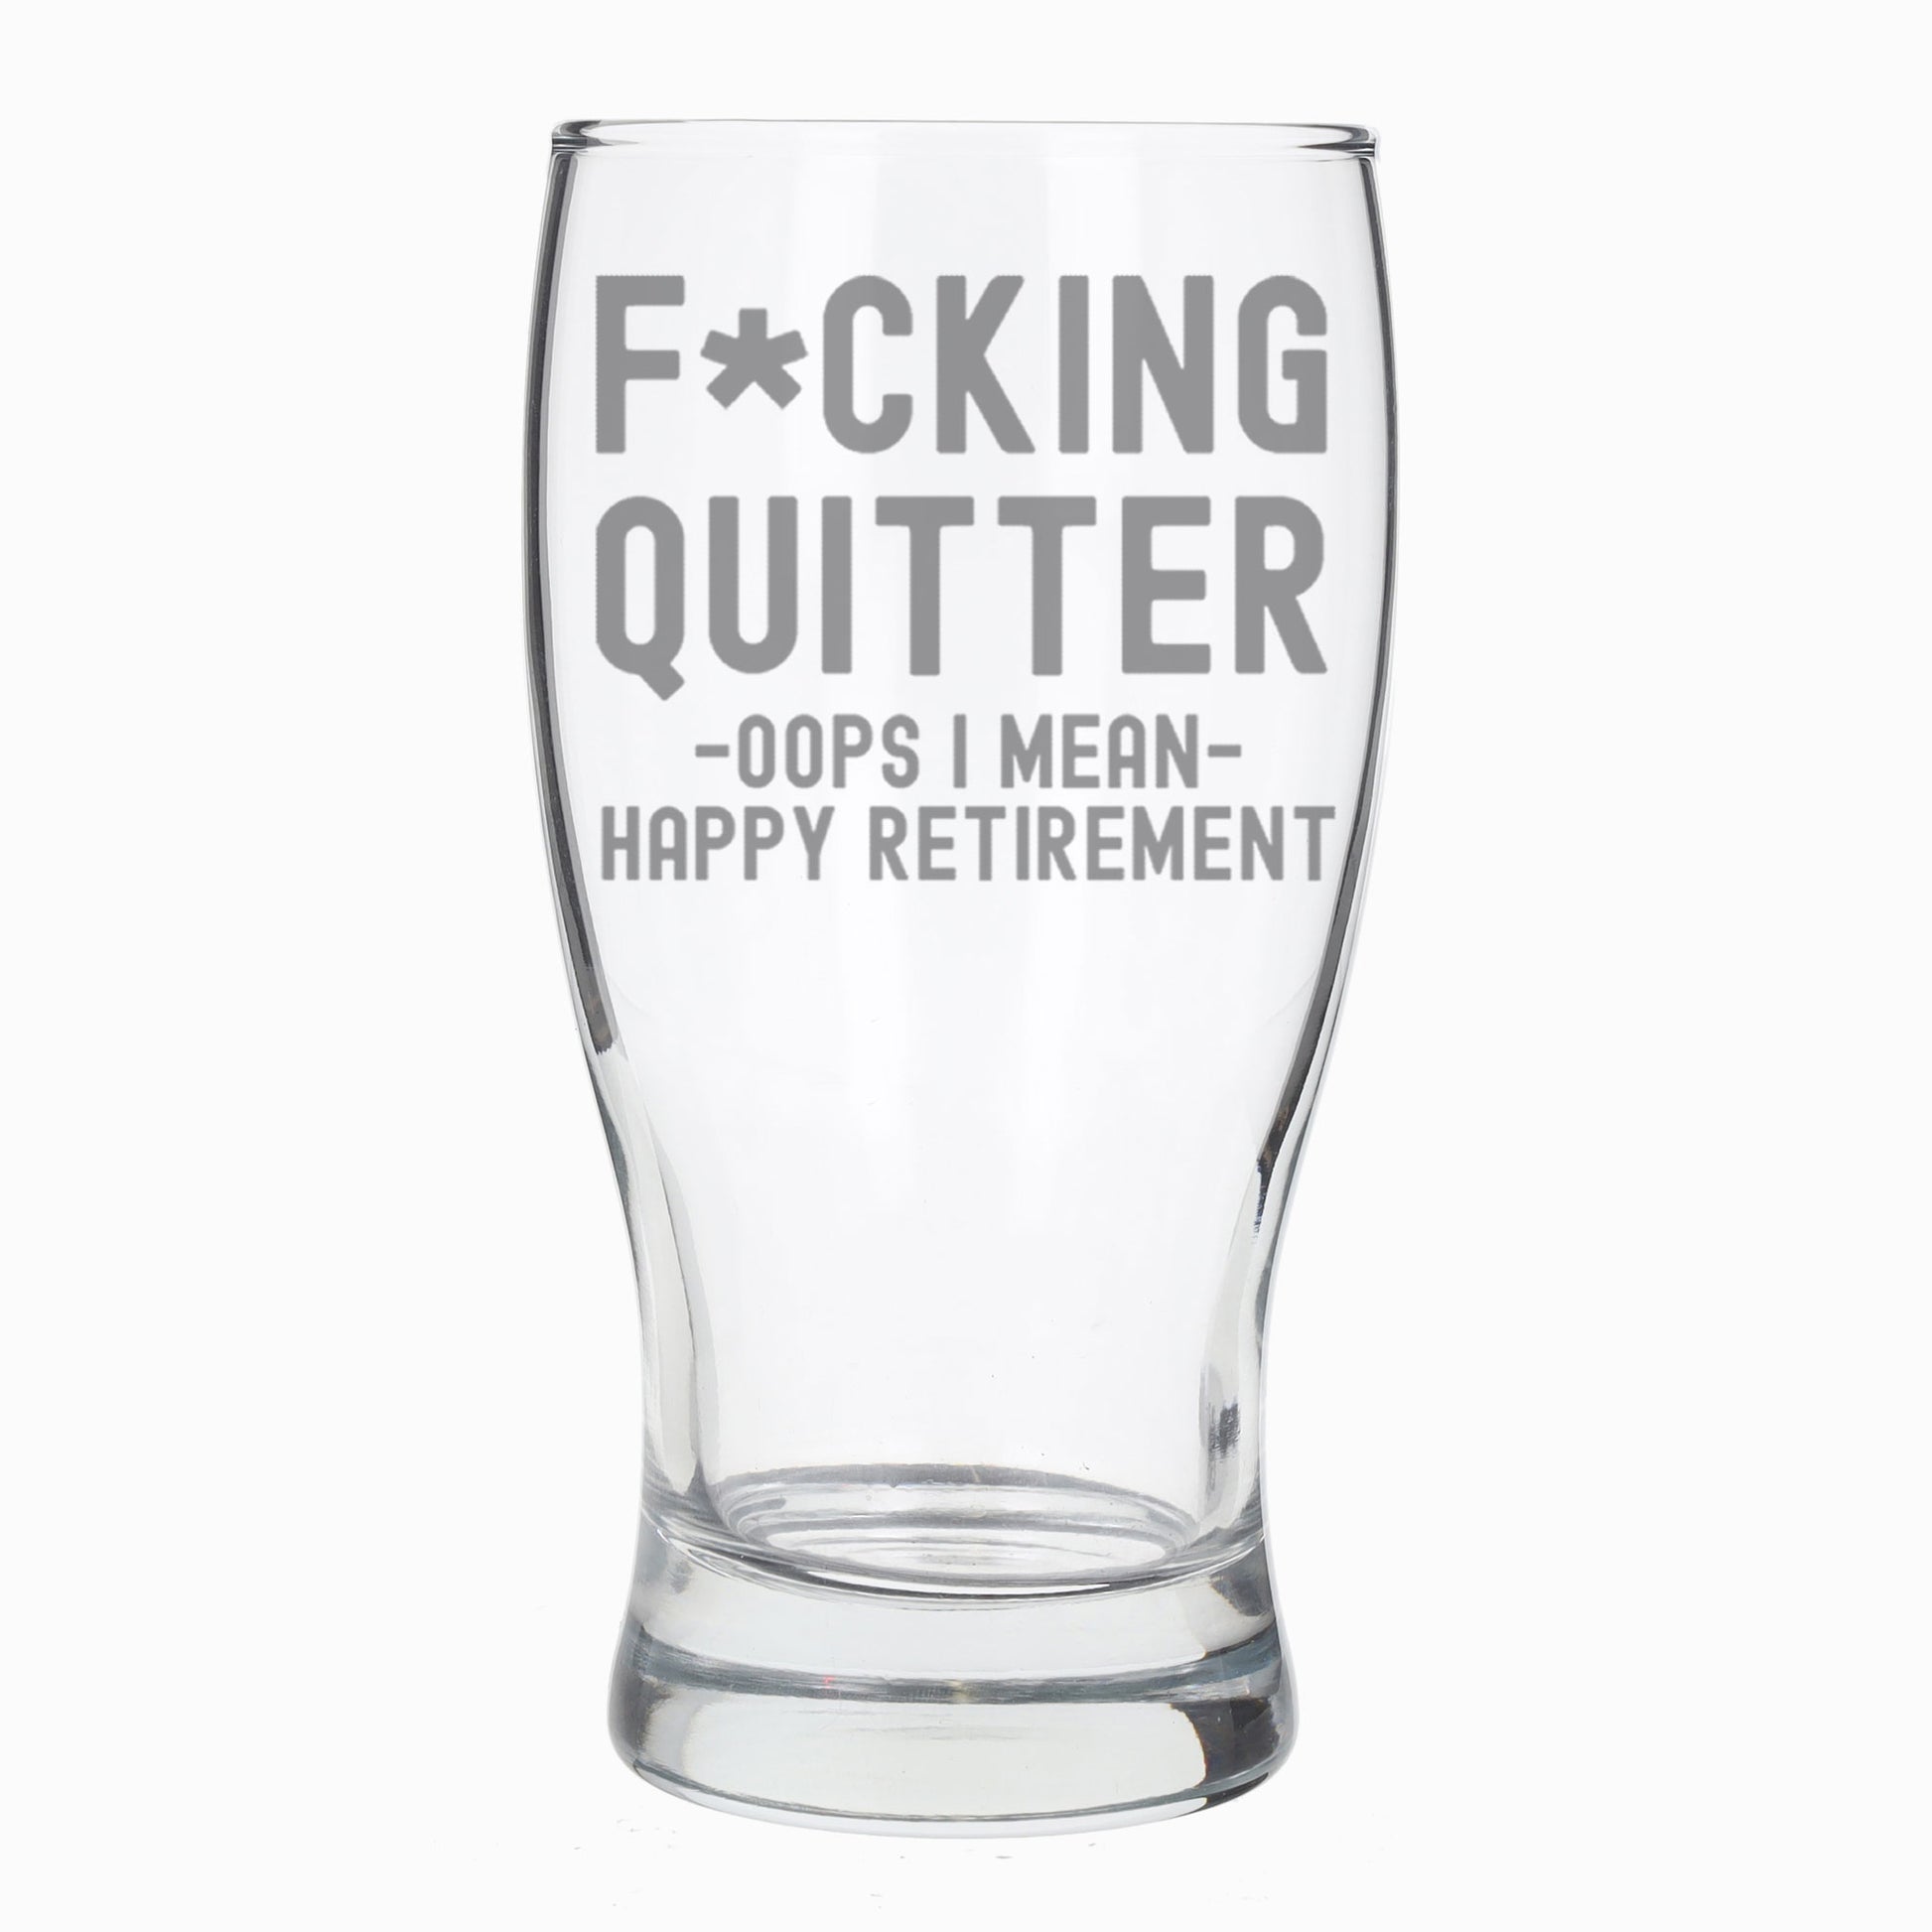 Engraved "F*cking Quitter, Oops I mean Happy Retirement" Beer Glass and/or Coaster Novelty Gift  - Always Looking Good - Beer Glass Only  